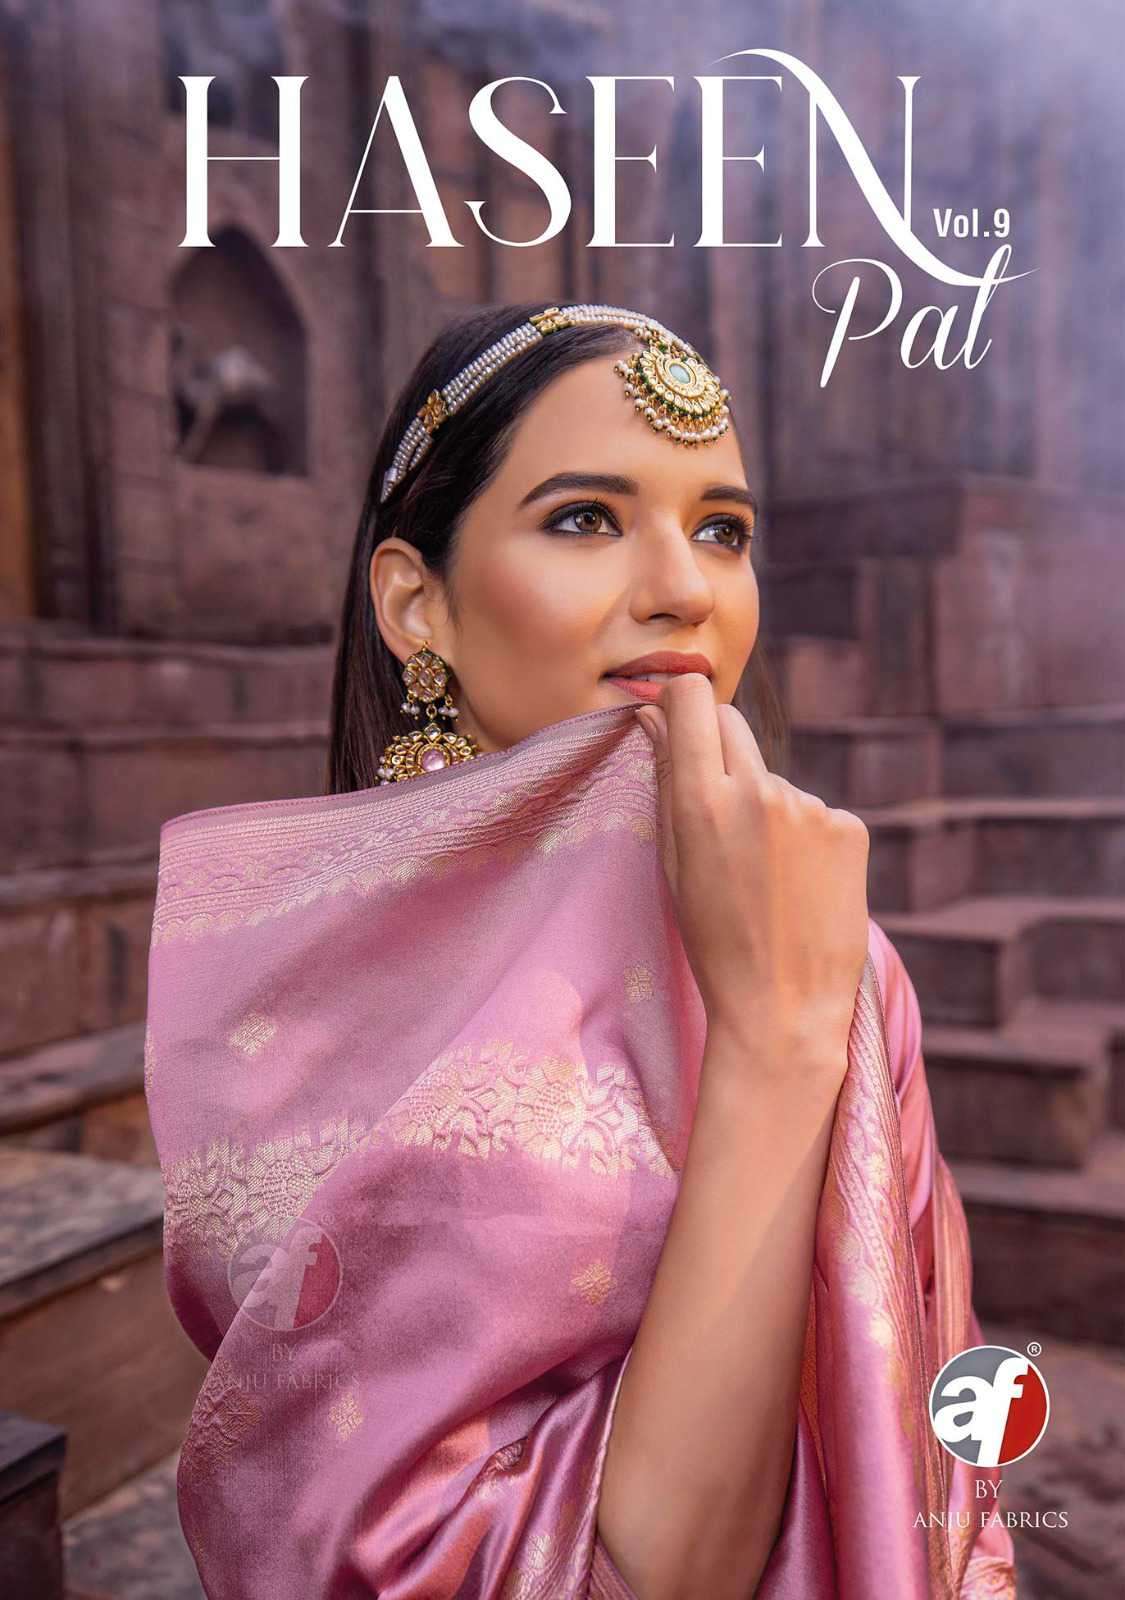 Af Stock Out Haseen Pal Vol 9 By Anju Fabrics Banarasi Designs Dress Latest Collection